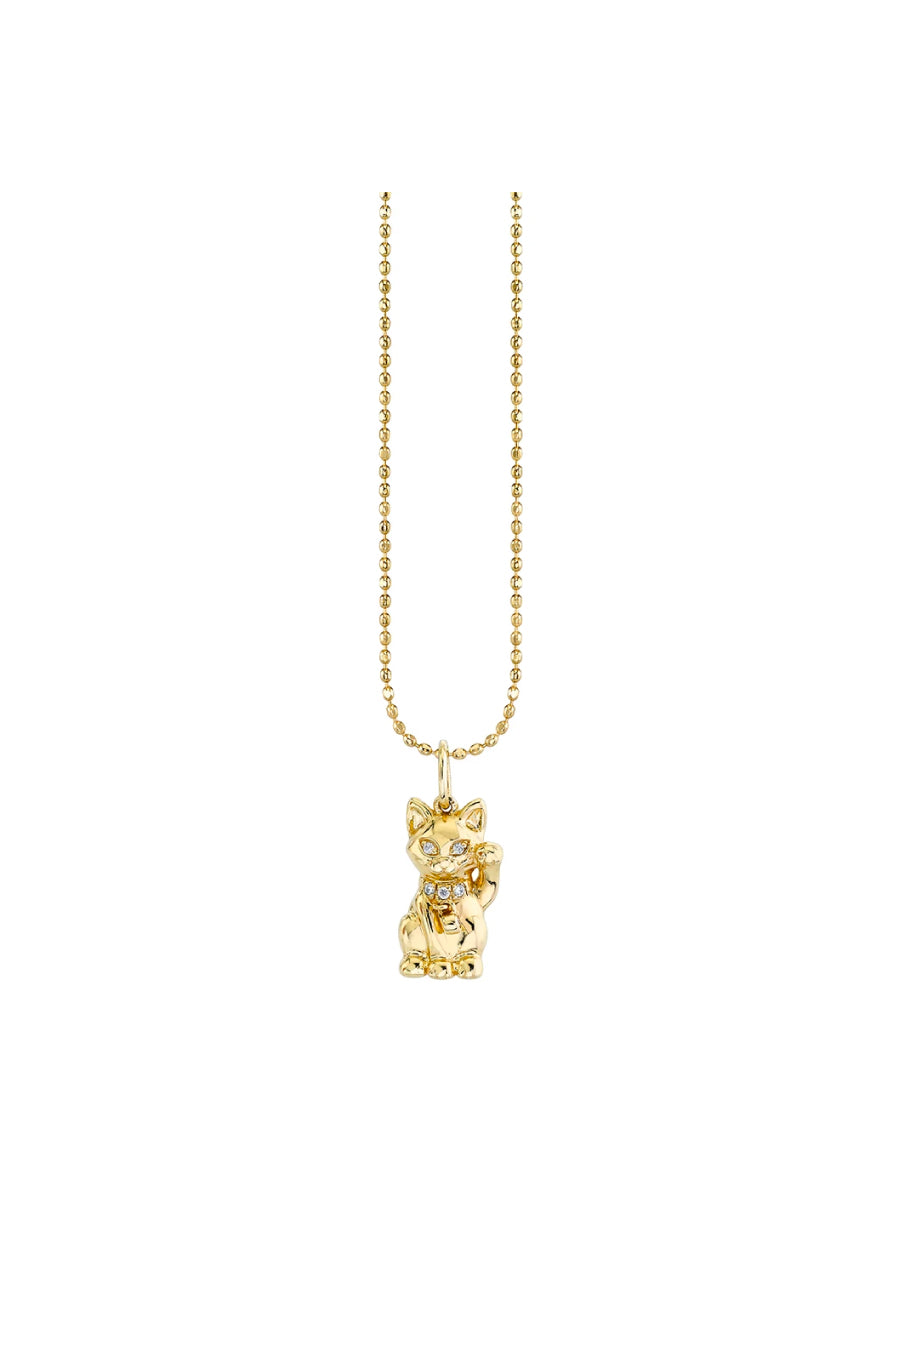 Sydney Evan Lucky Cat Charm Necklace - Yellow Gold